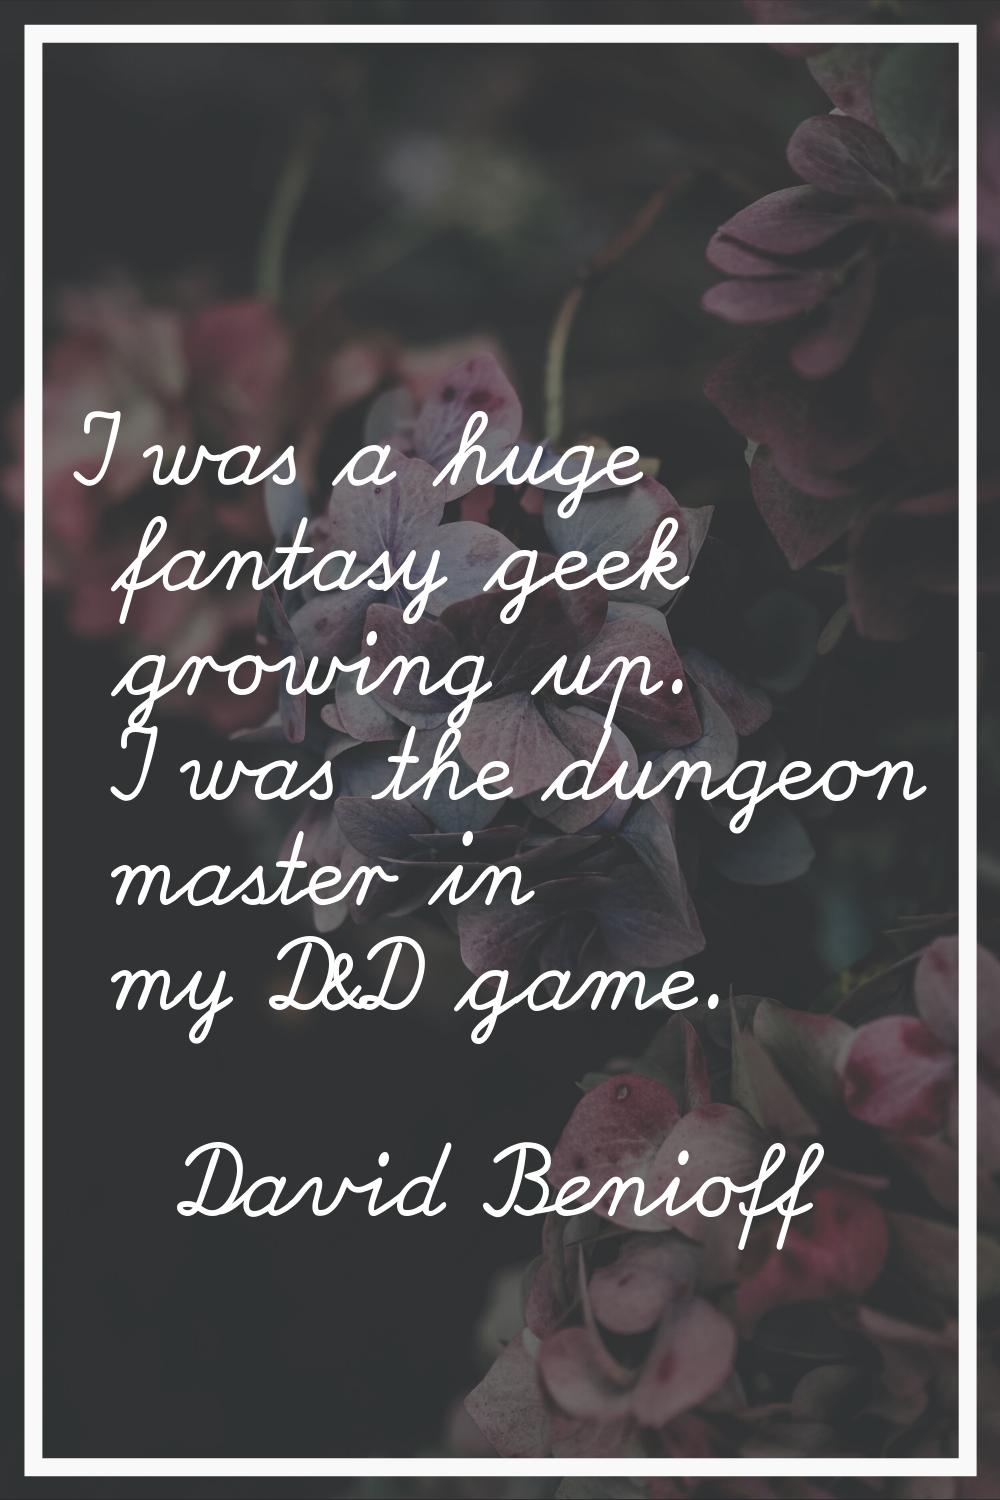 I was a huge fantasy geek growing up. I was the dungeon master in my D&D game.